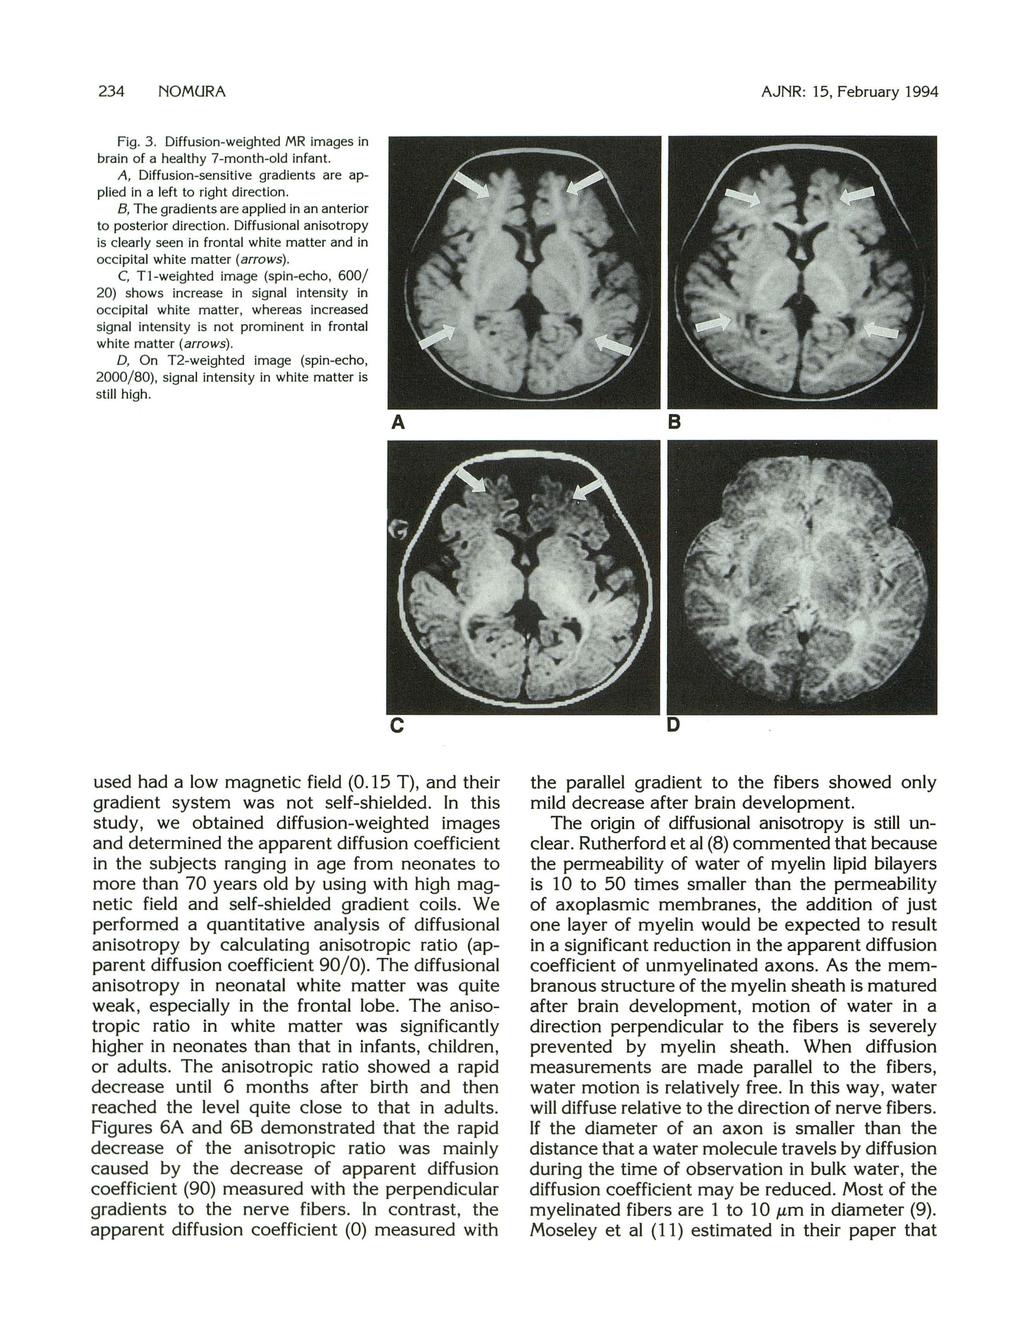 234 NOMURA AJNR: 15, February 1994 Fig. 3. Diffusion-weighted MR images in brain of a healthy 7-month-old infant. A, Diffusion-sensitive gradients are applied in a left to right direction.